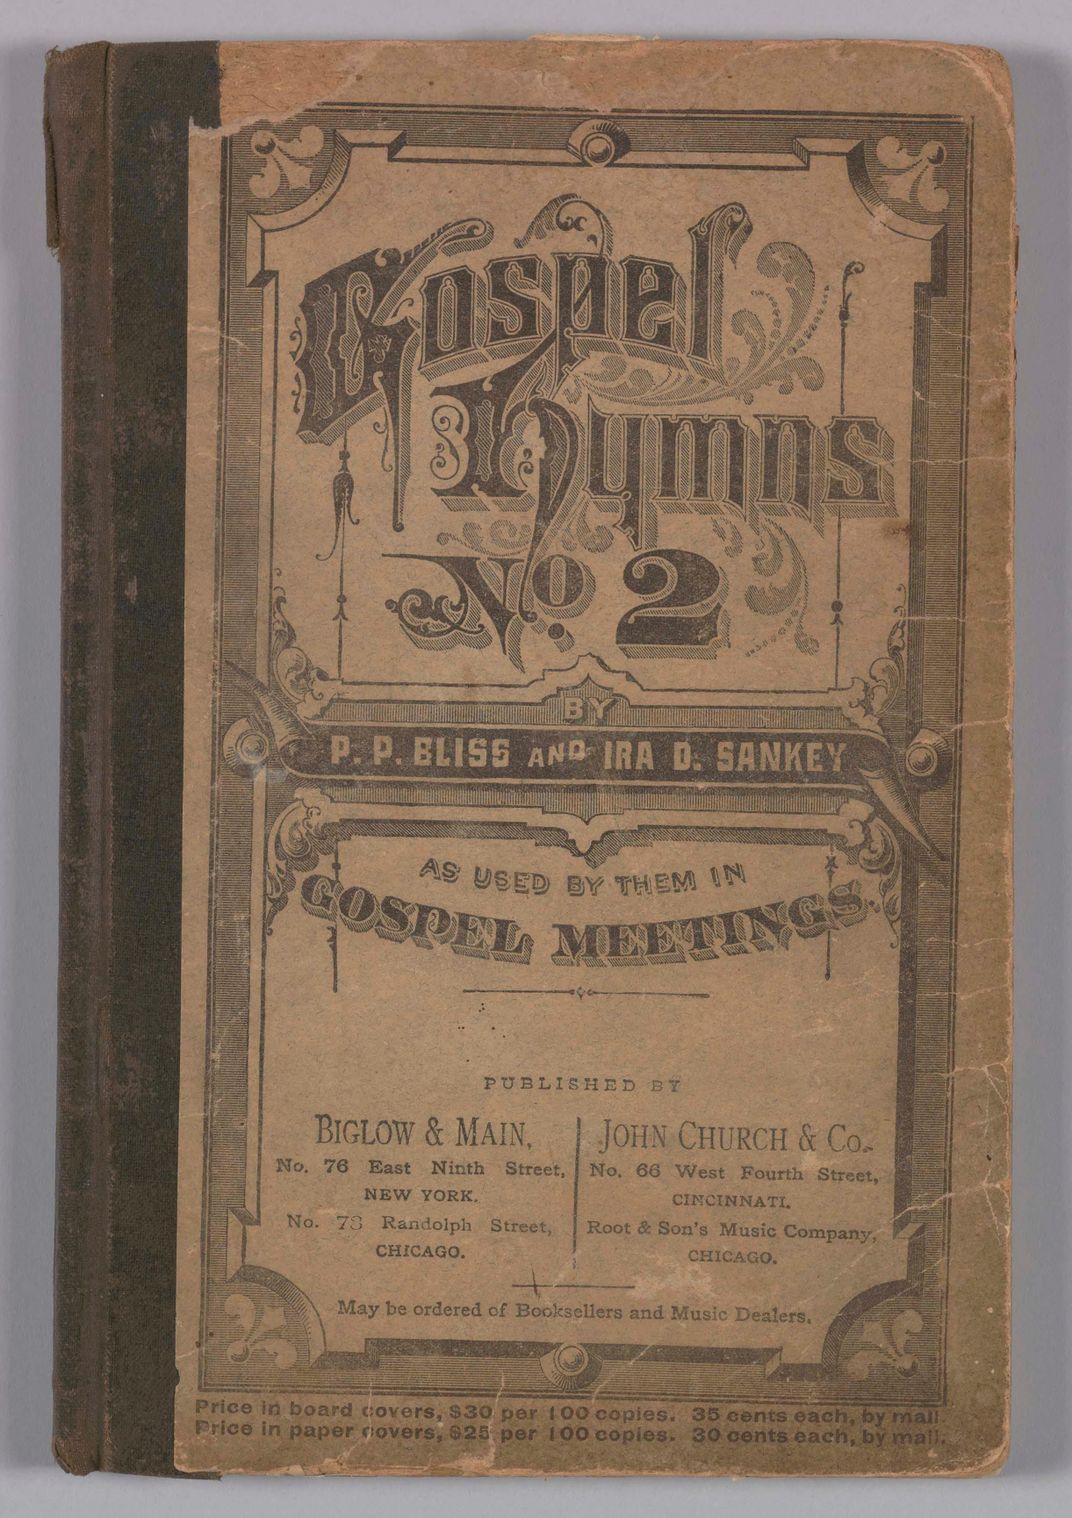 Personal Hymnal